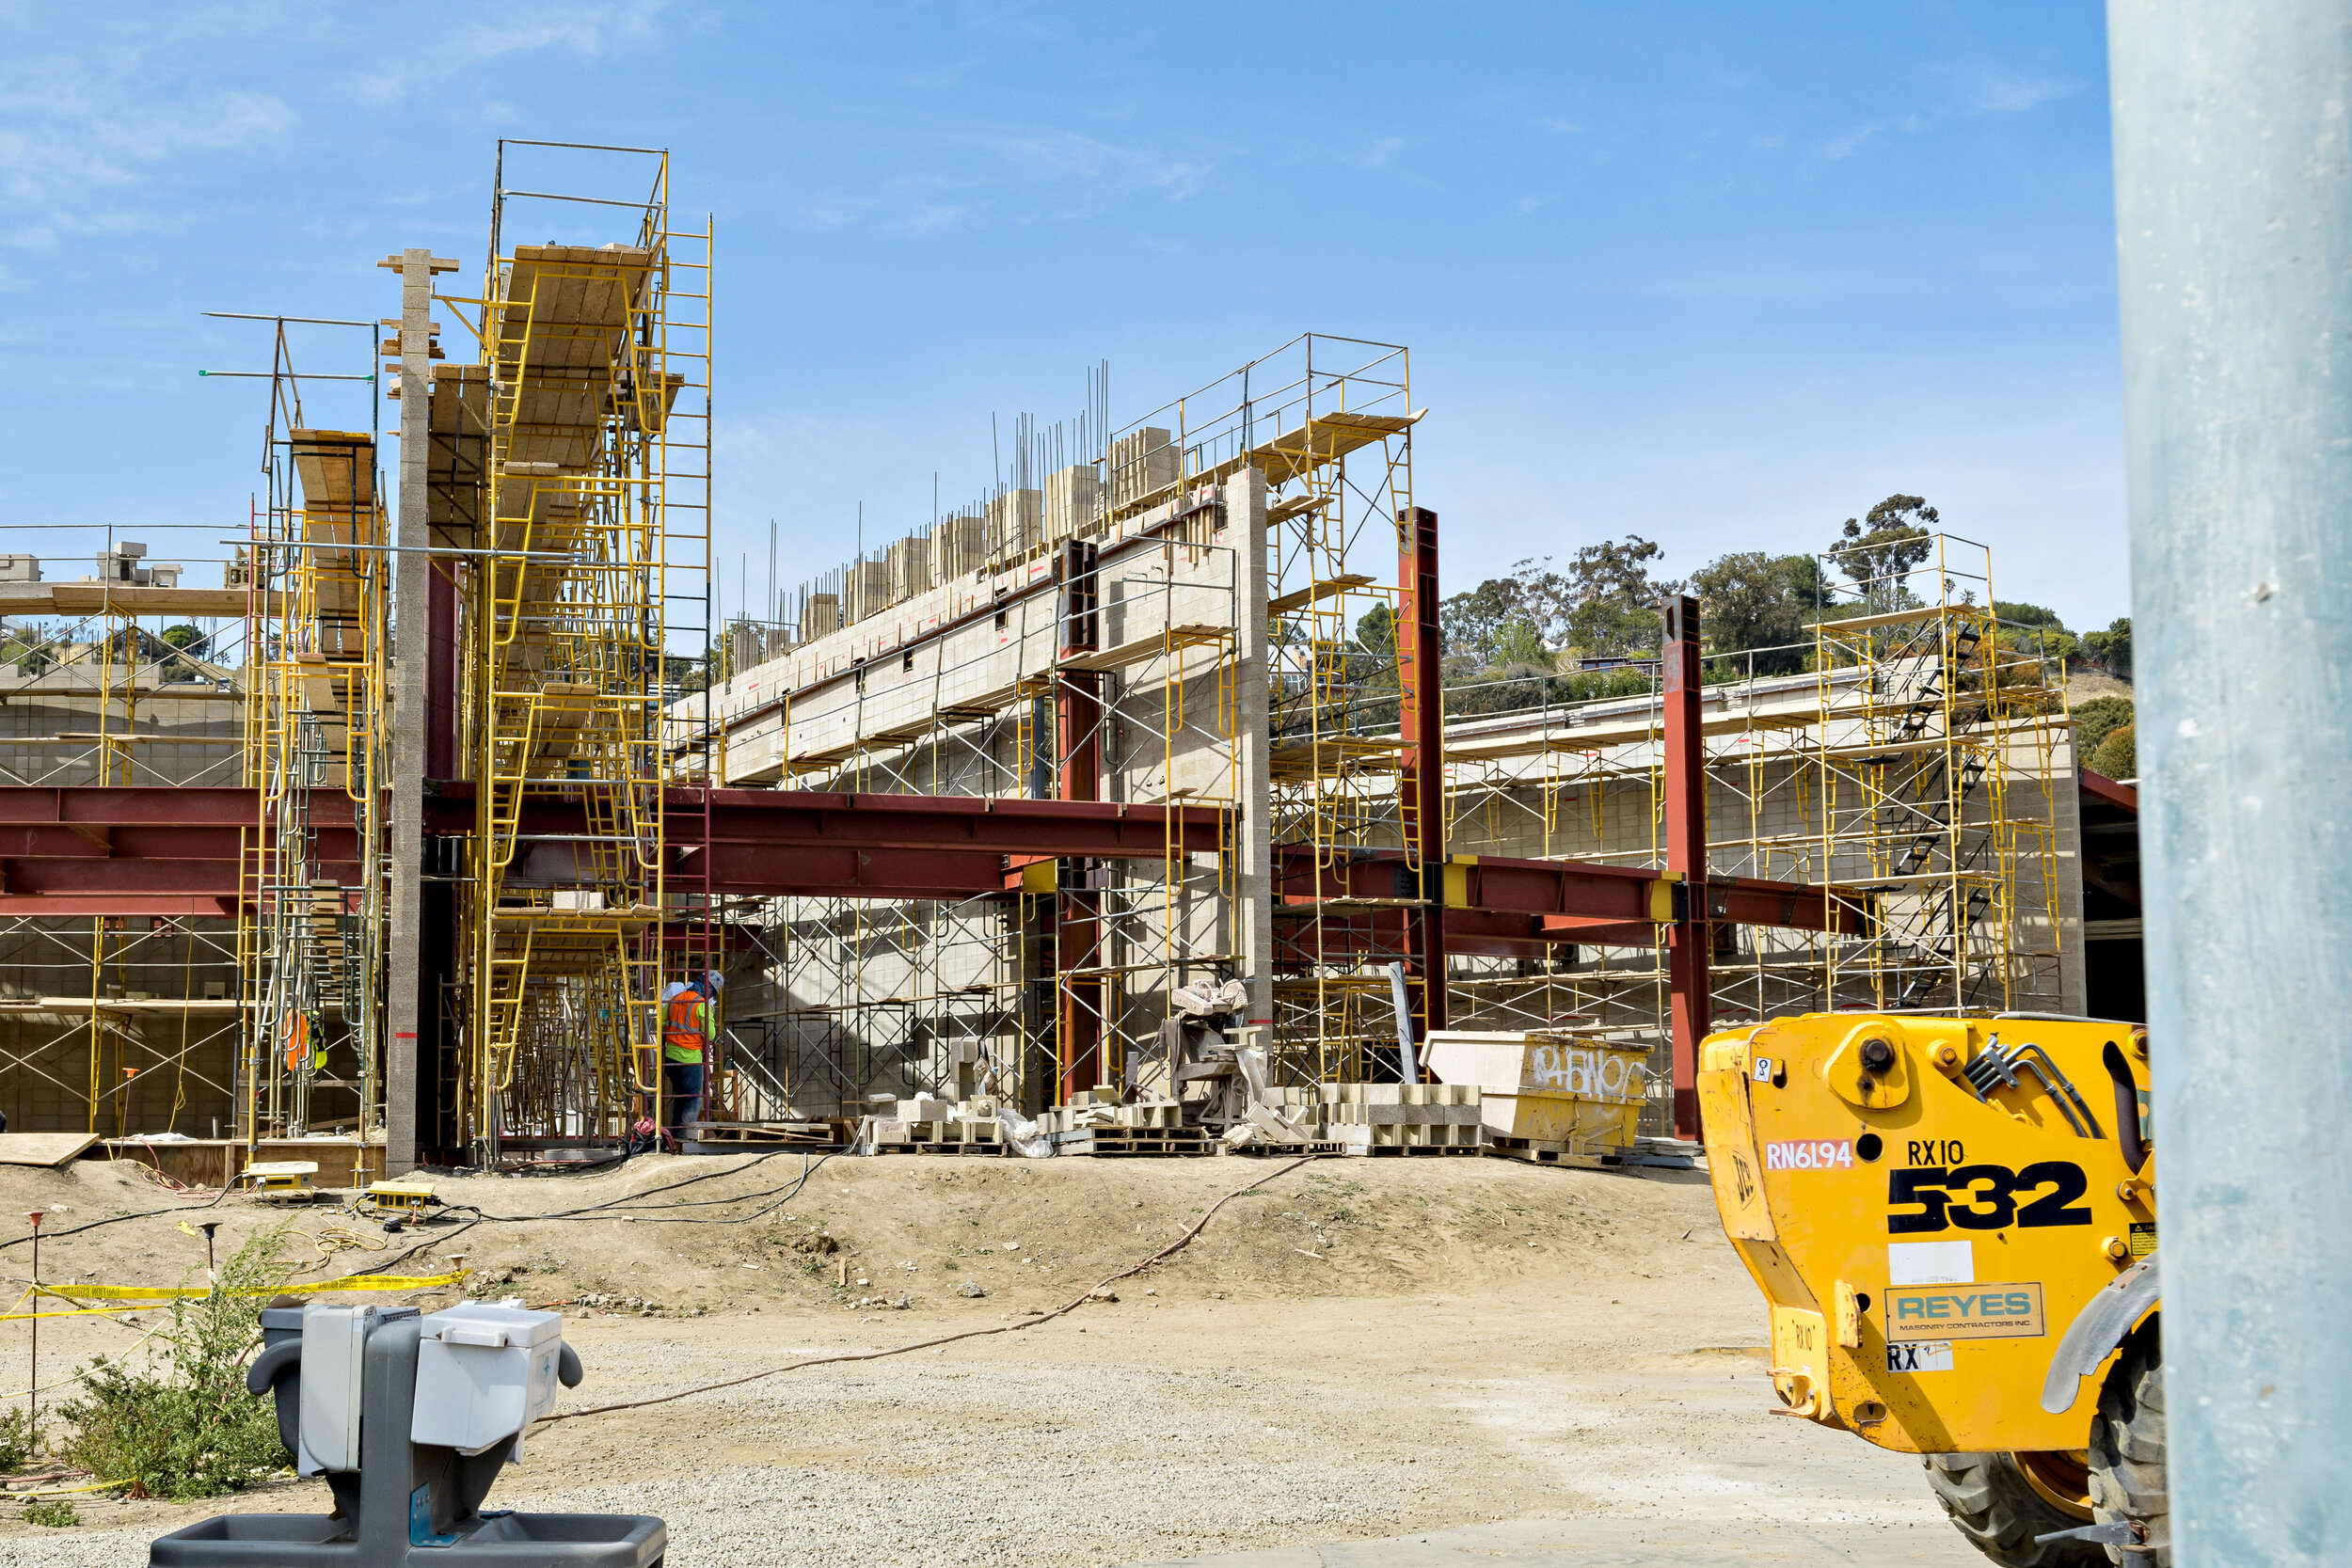  A view of the construction site at the Santa Monica College (SMC) Malibu campus in Malibu, Calif., on Monday, April 5, 2021. Building at the site has been proceeding for the last year, and the campus is scheduled to be finished by the end of 2021, a